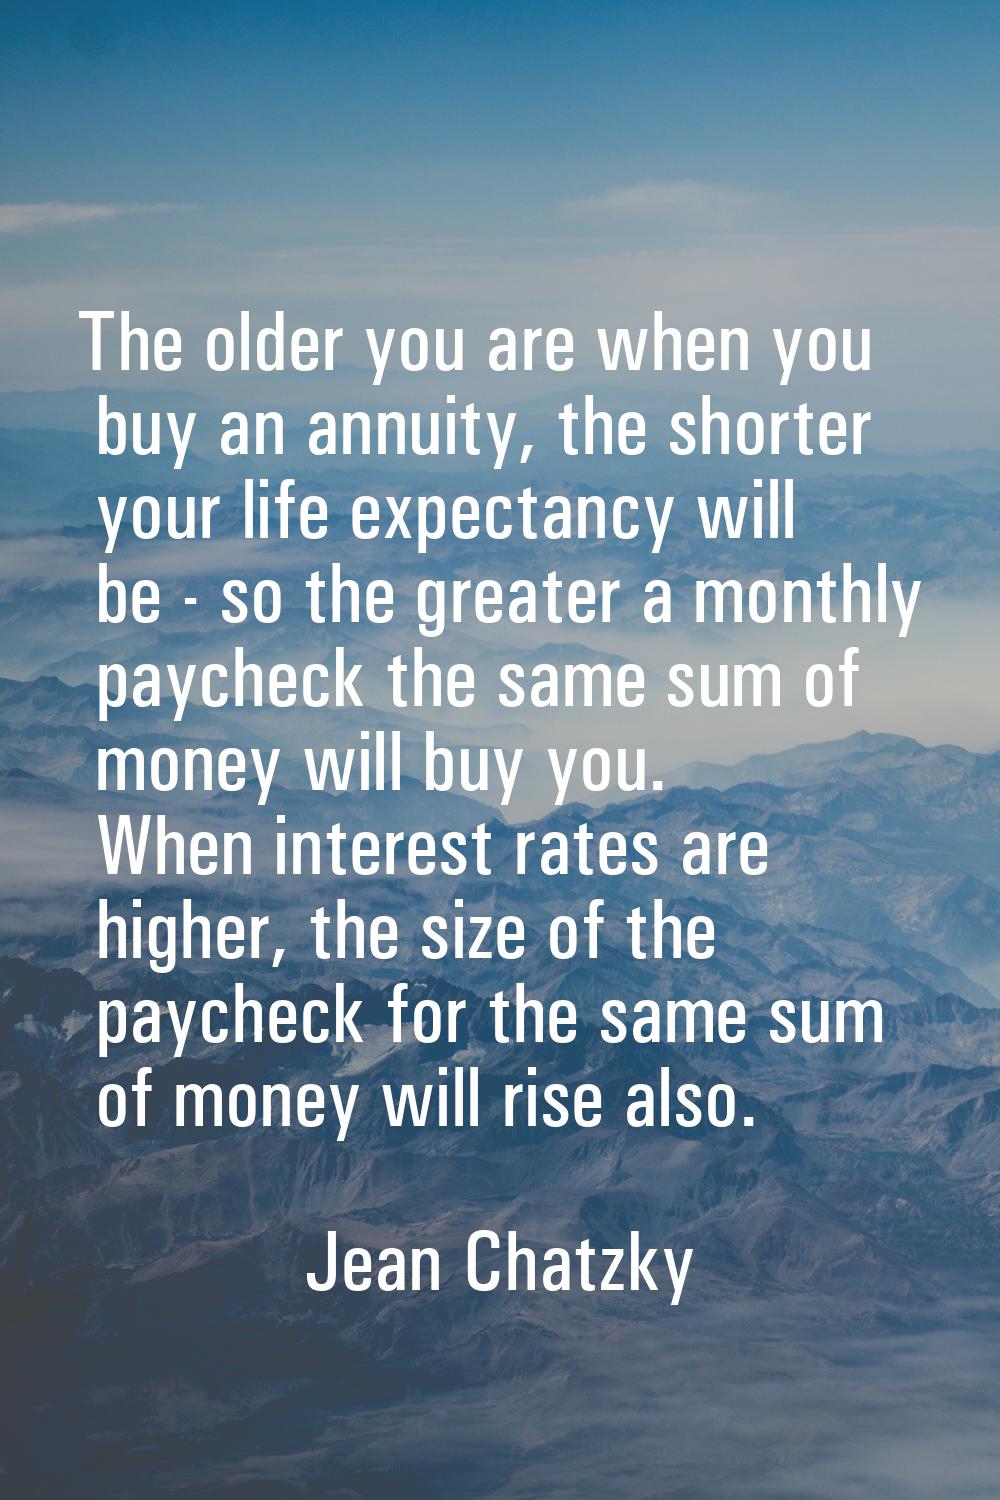 The older you are when you buy an annuity, the shorter your life expectancy will be - so the greate